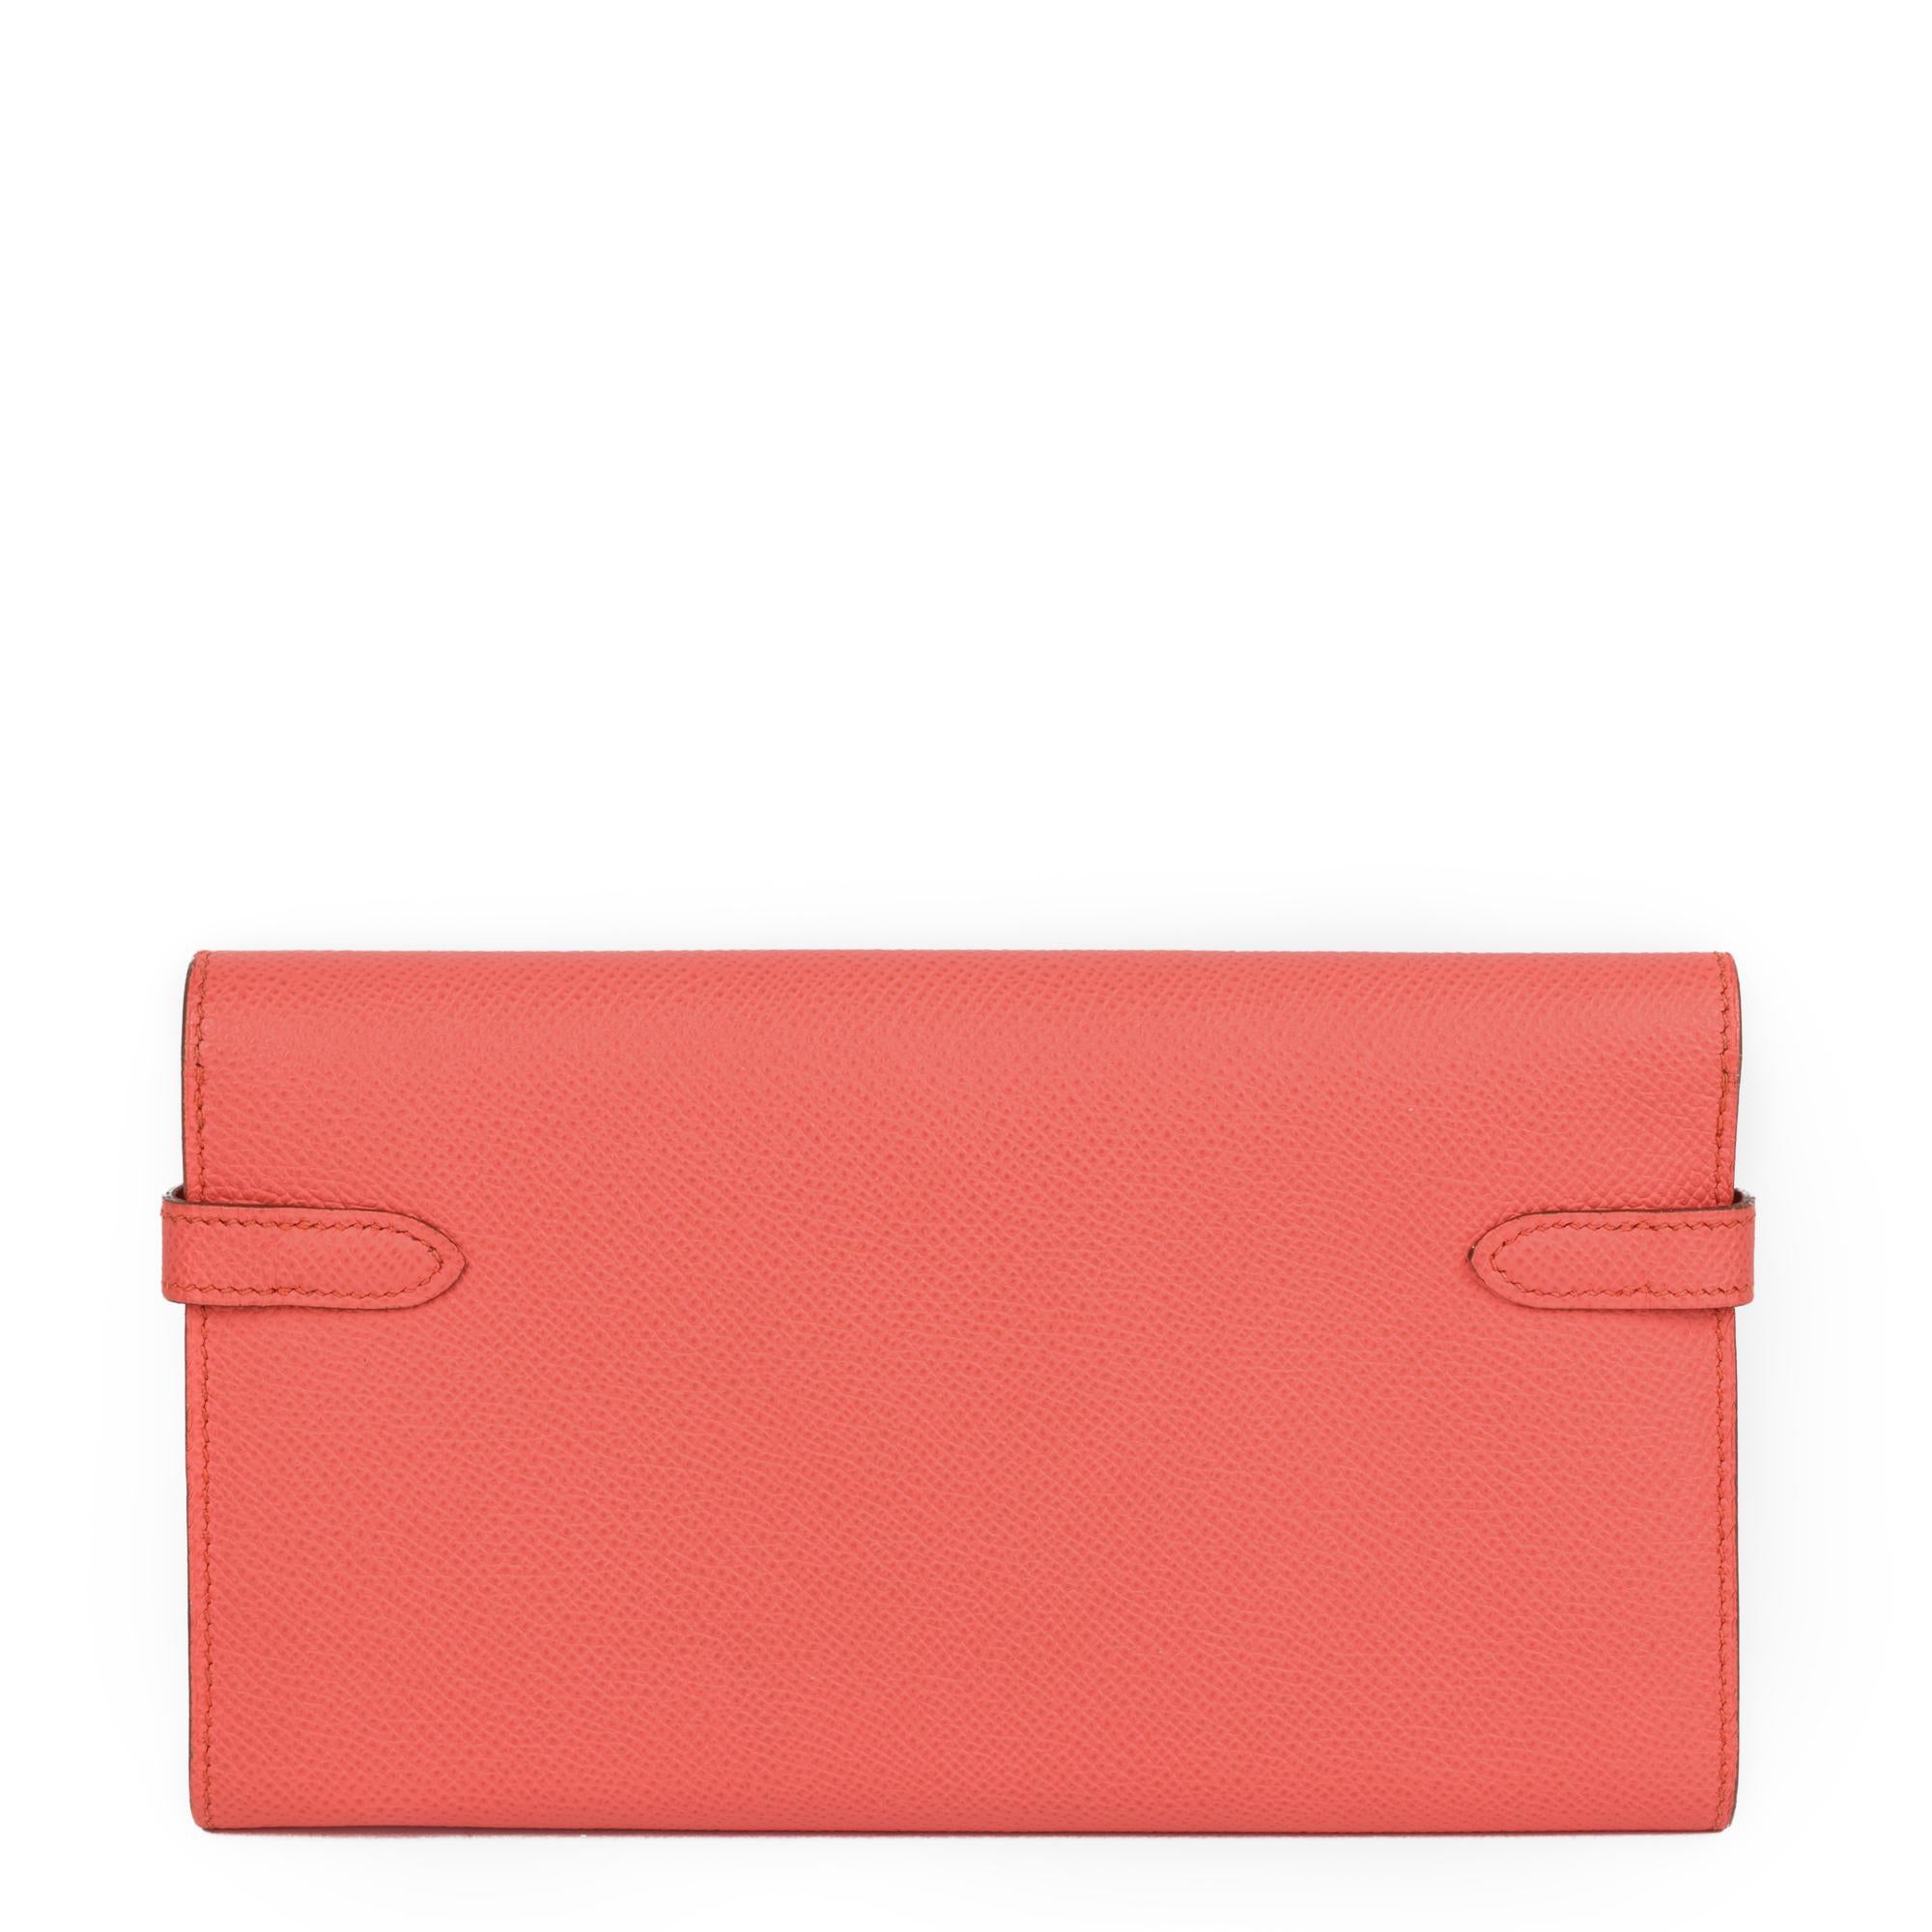 Hermès ROSE JAIPUR EPSOM LEATHER KELLY LONG WALLET


CONDITION NOTES
The exterior is in excellent condition with minimal signs of use.
The interior is in excellent condition with minimal signs of use.
The hardware is in excellent condition with